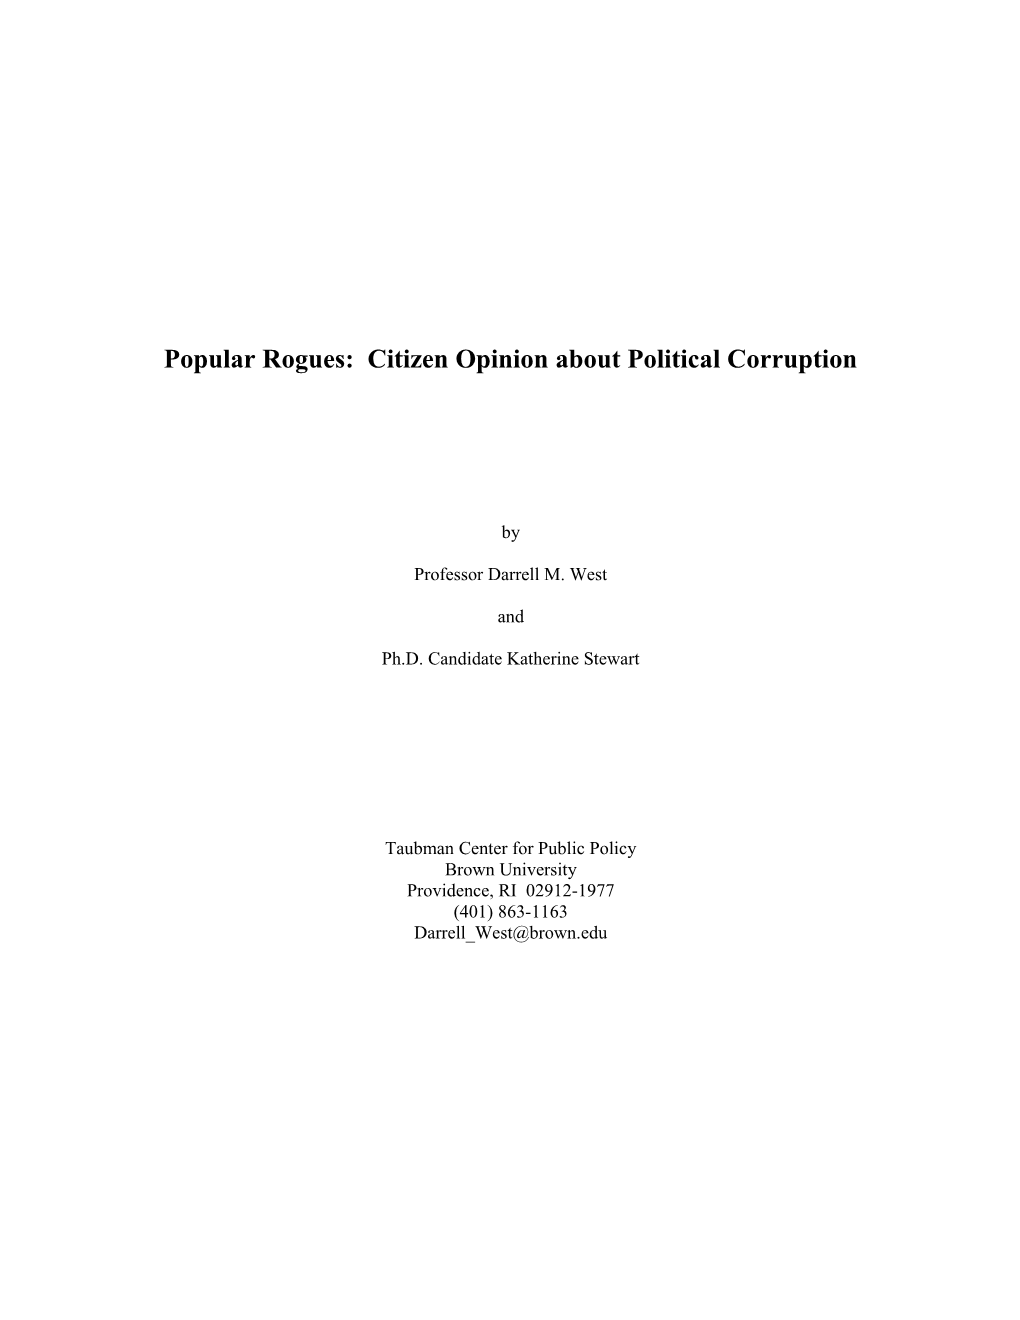 Popular Rogues: Citizen Opinion About Political Corruption